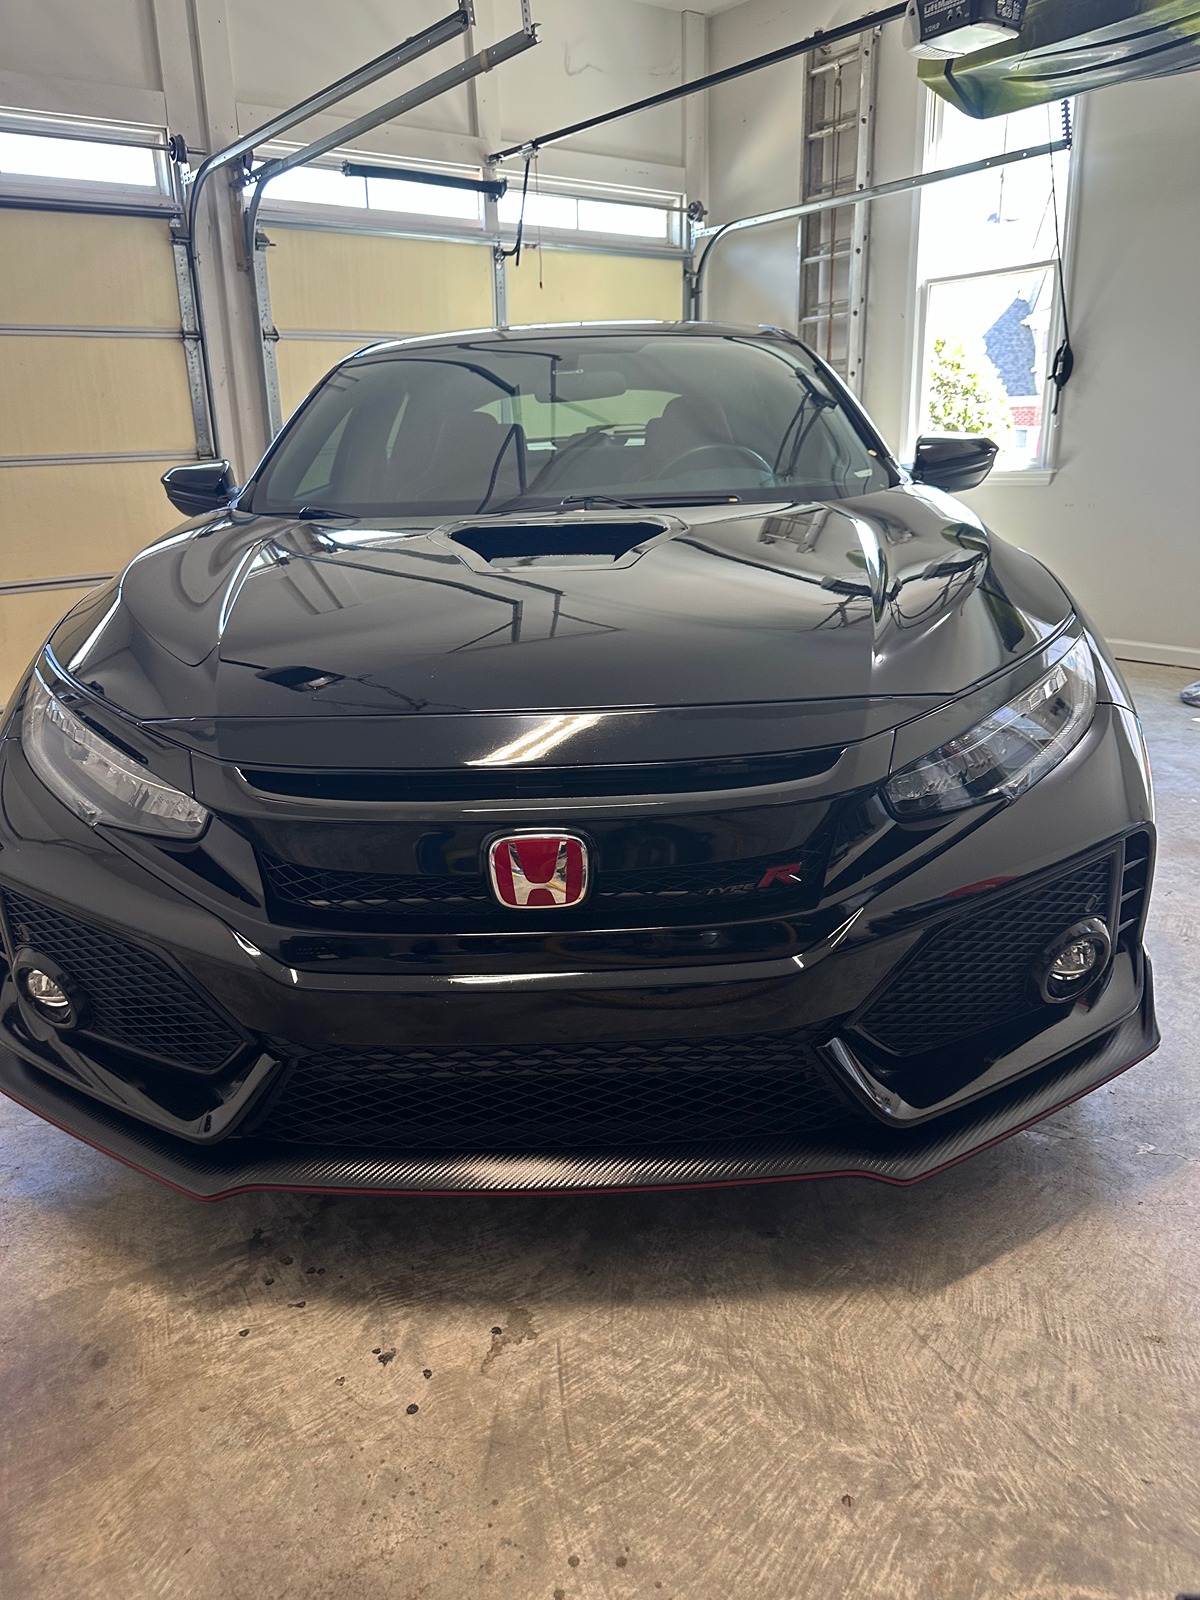 Honda Civic 10th gen Sold. 2019 Civic Type R for sale IMG_8215